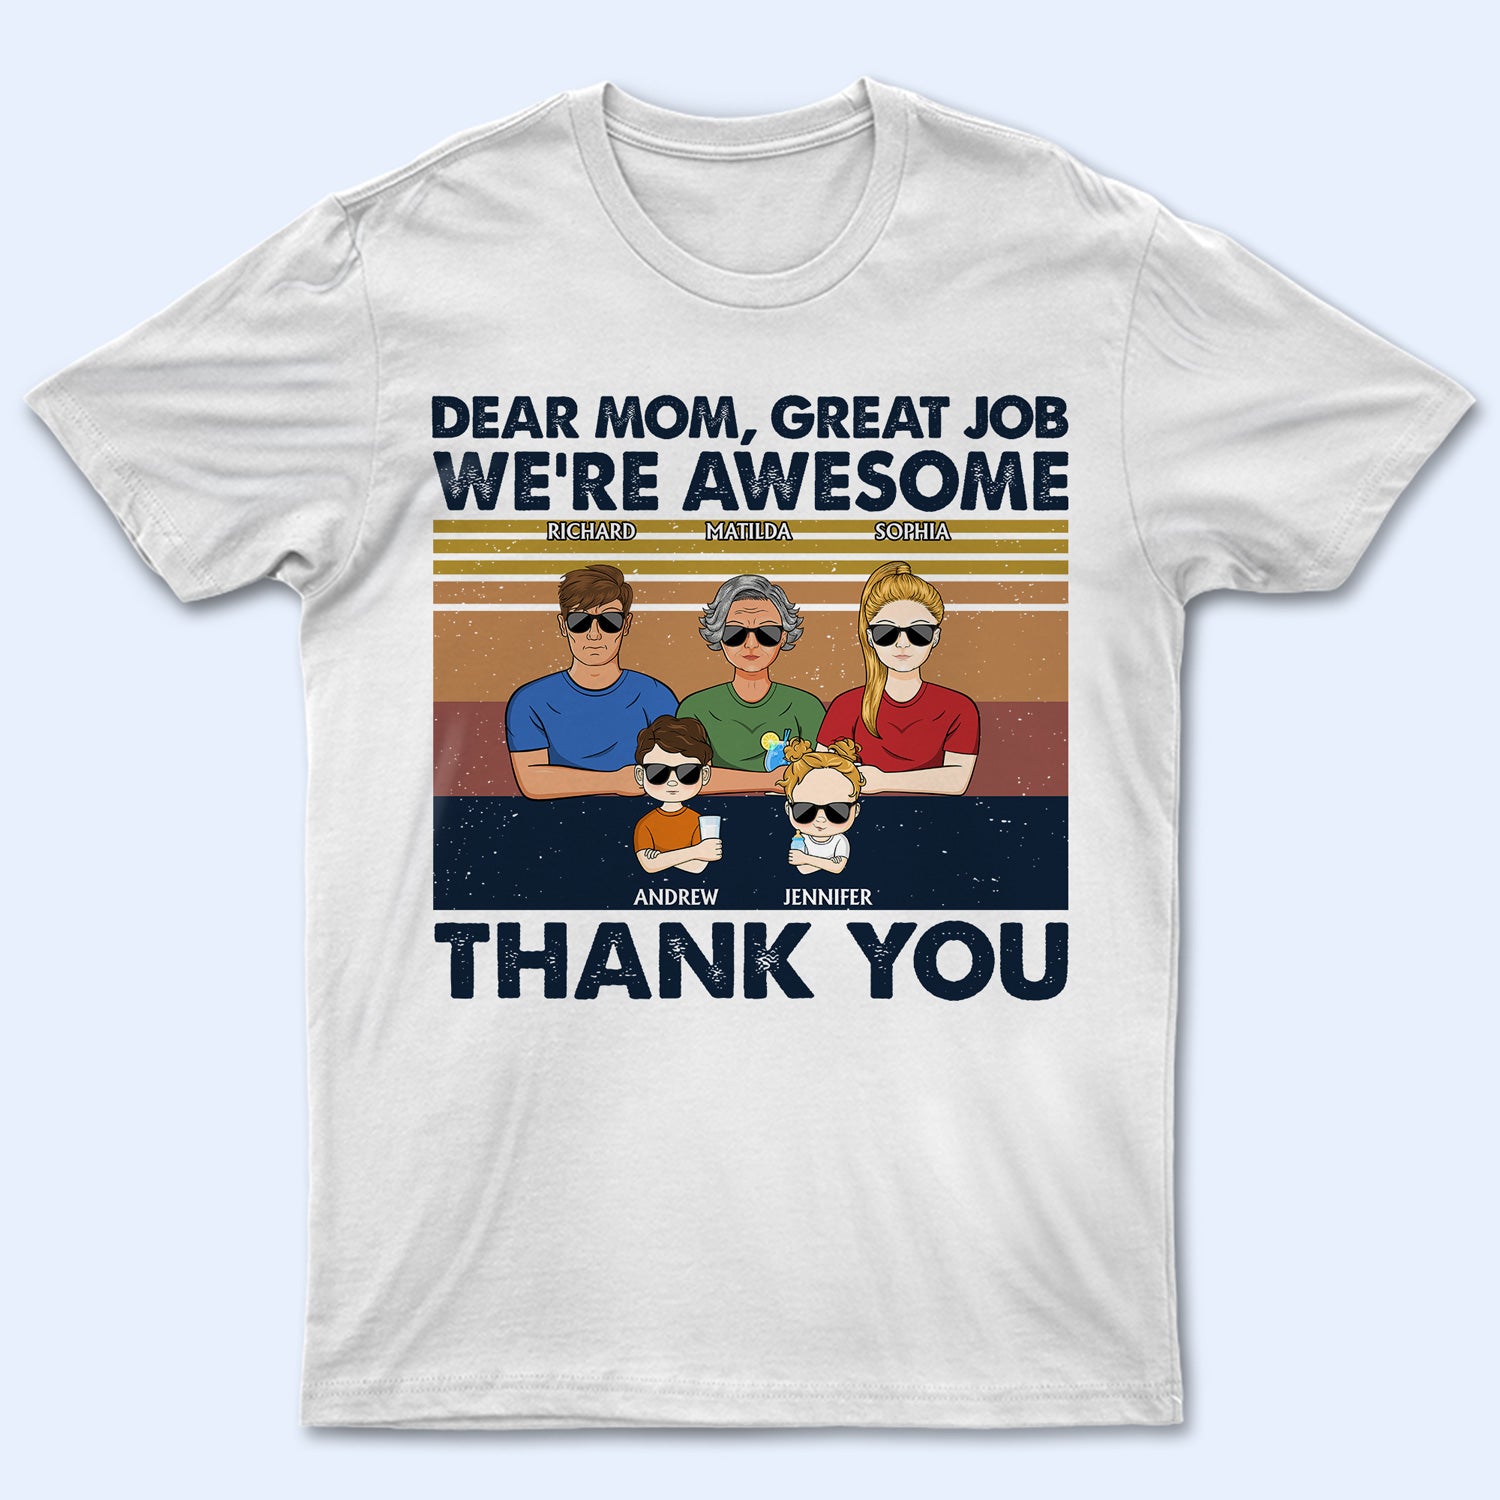 Dear Mom Great Job I'm Awesome Thank You Adult And Kid - Birthday, Loving Gift For Mother, Grandma, Grandmother - Personalized Custom T Shirt